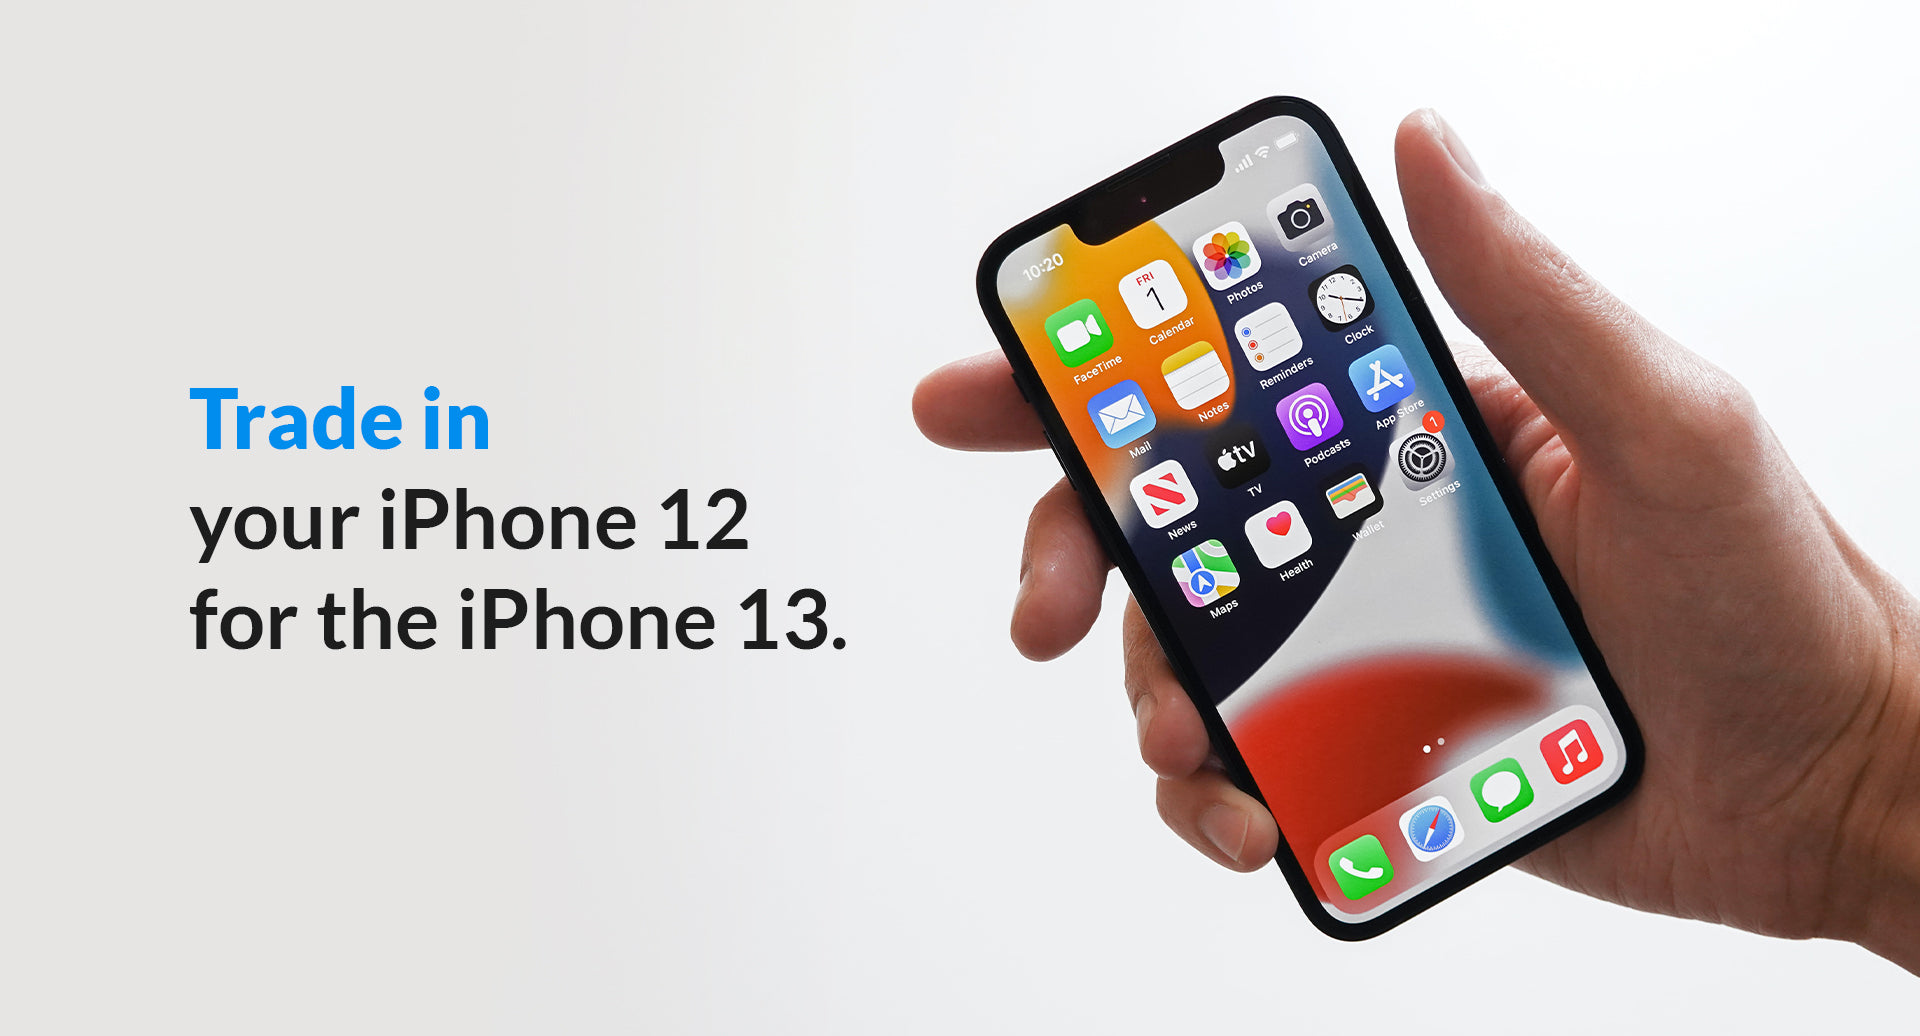 How to trade in your iPhone 12 for the iPhone 13